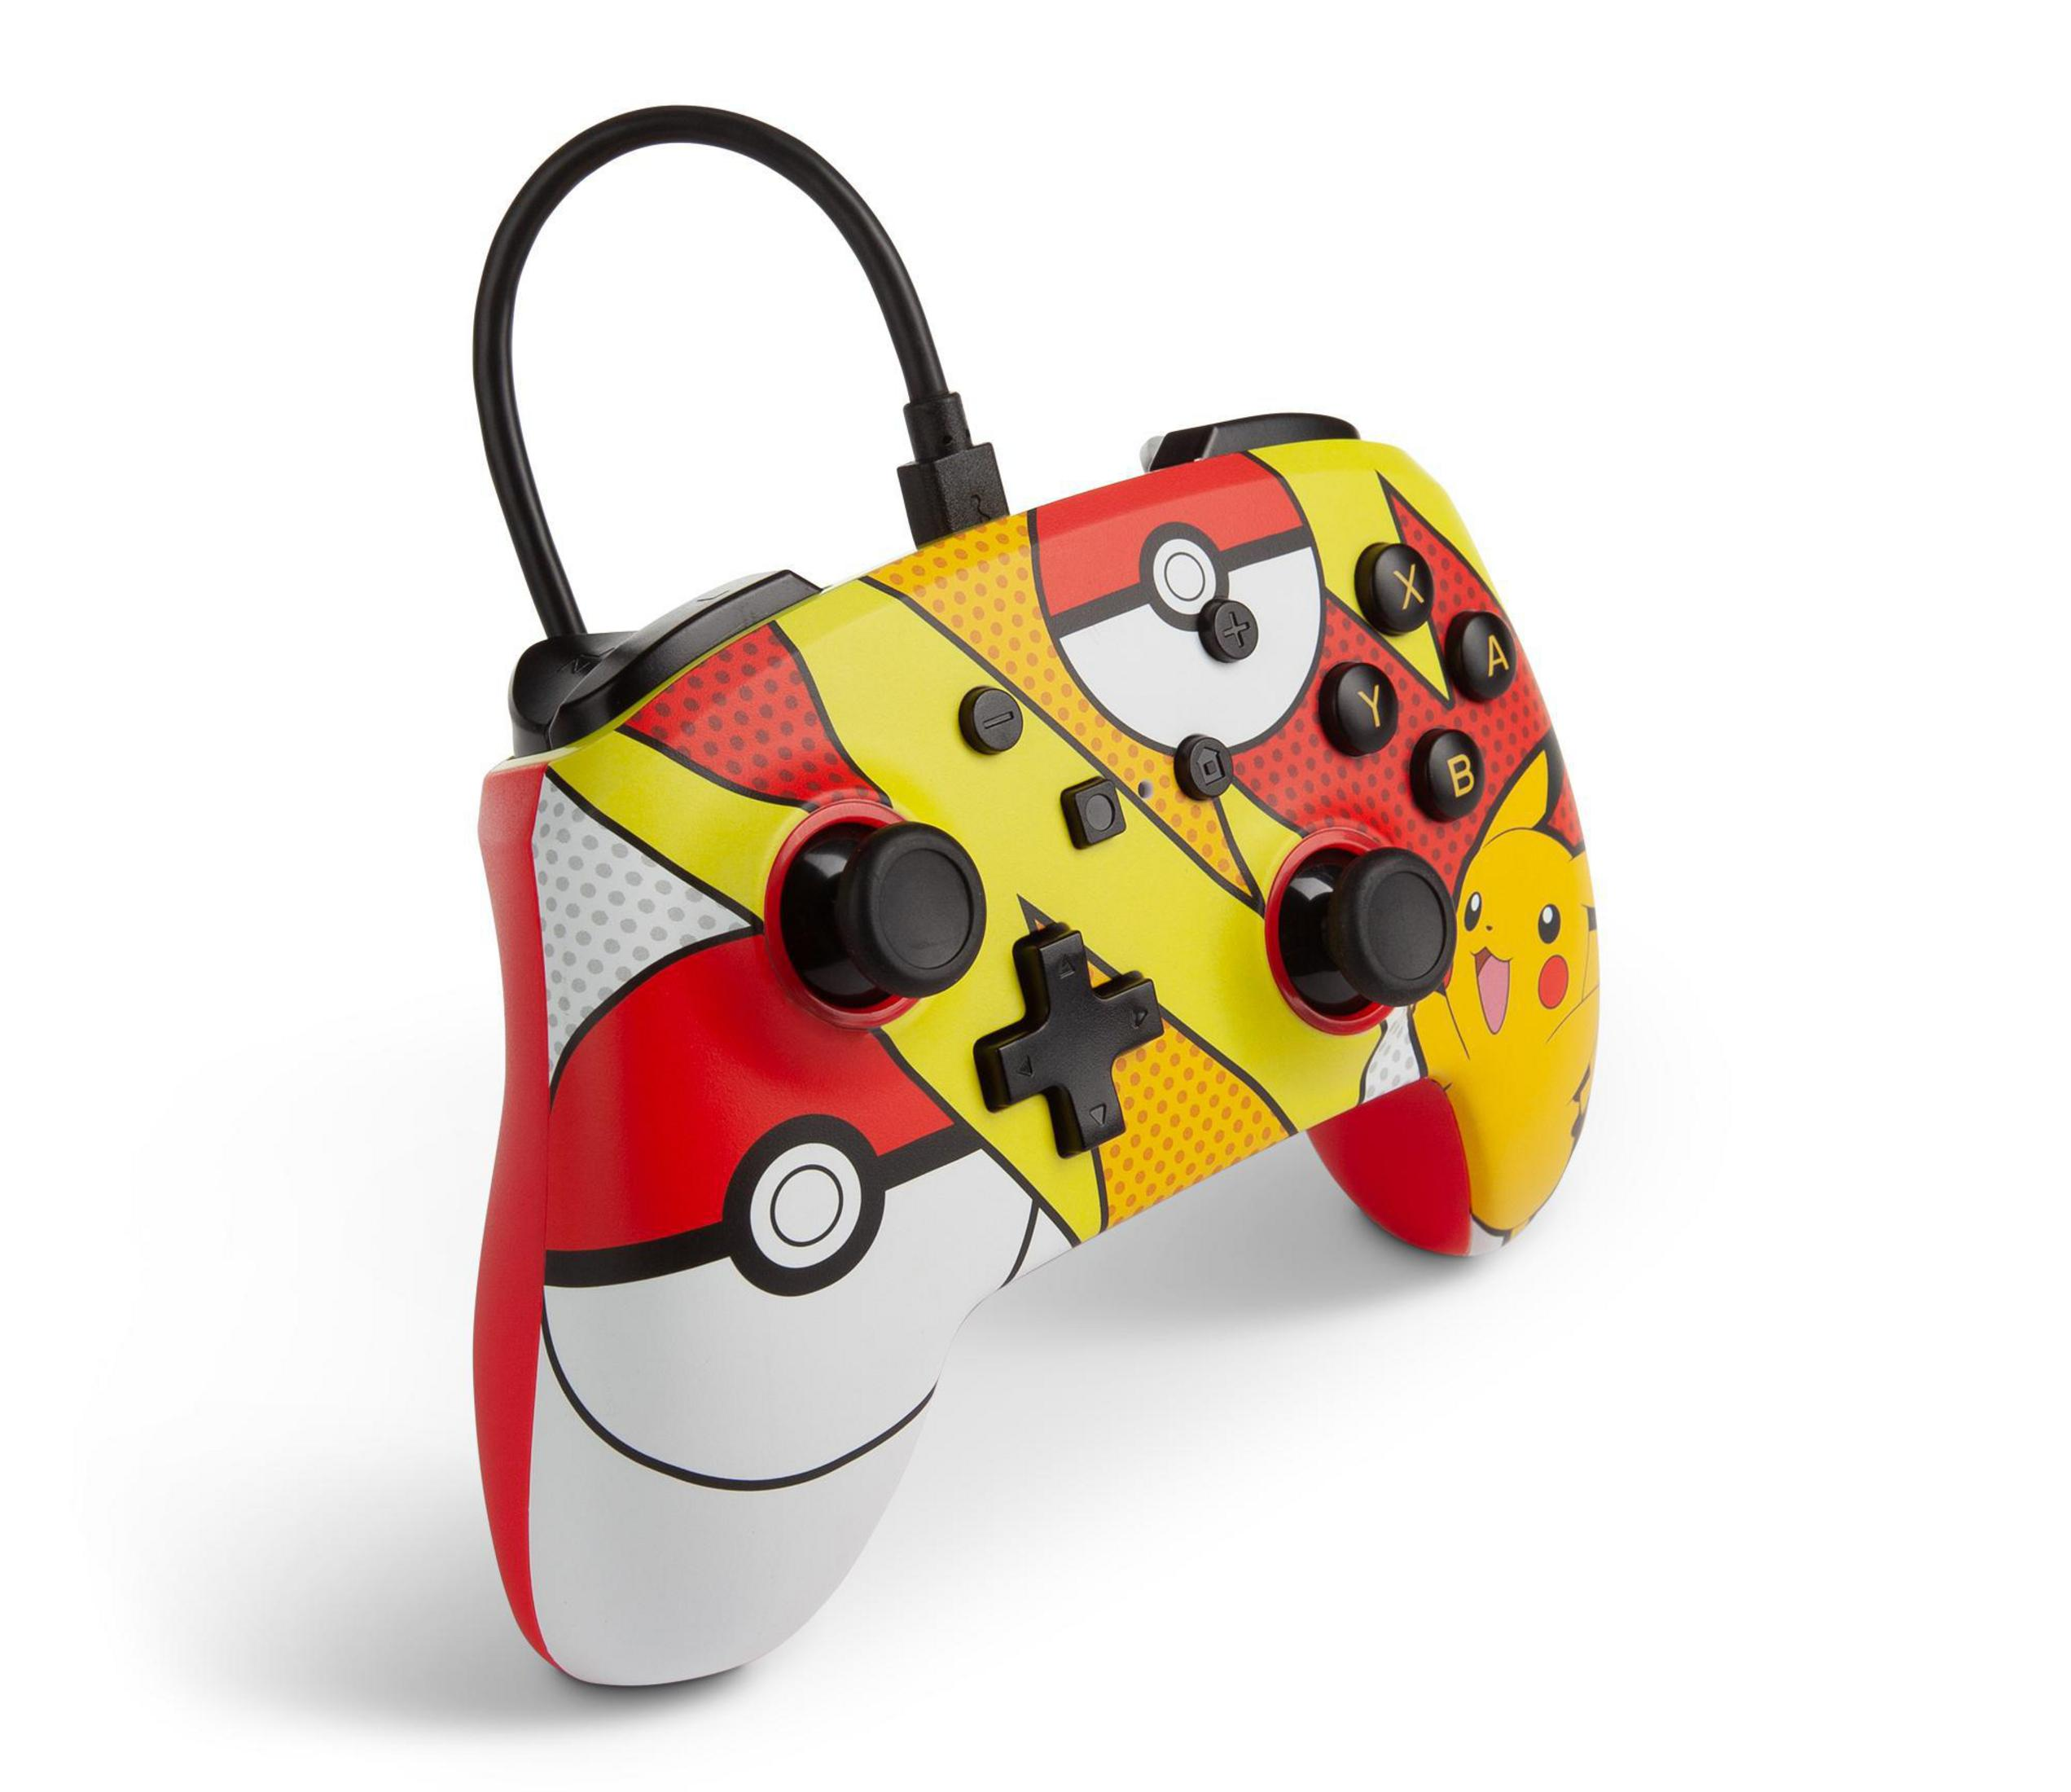 POWER A PA1518905-01 NSW WIRED PIKACHU POPART CONTROLLER Rot/Gelb Controller